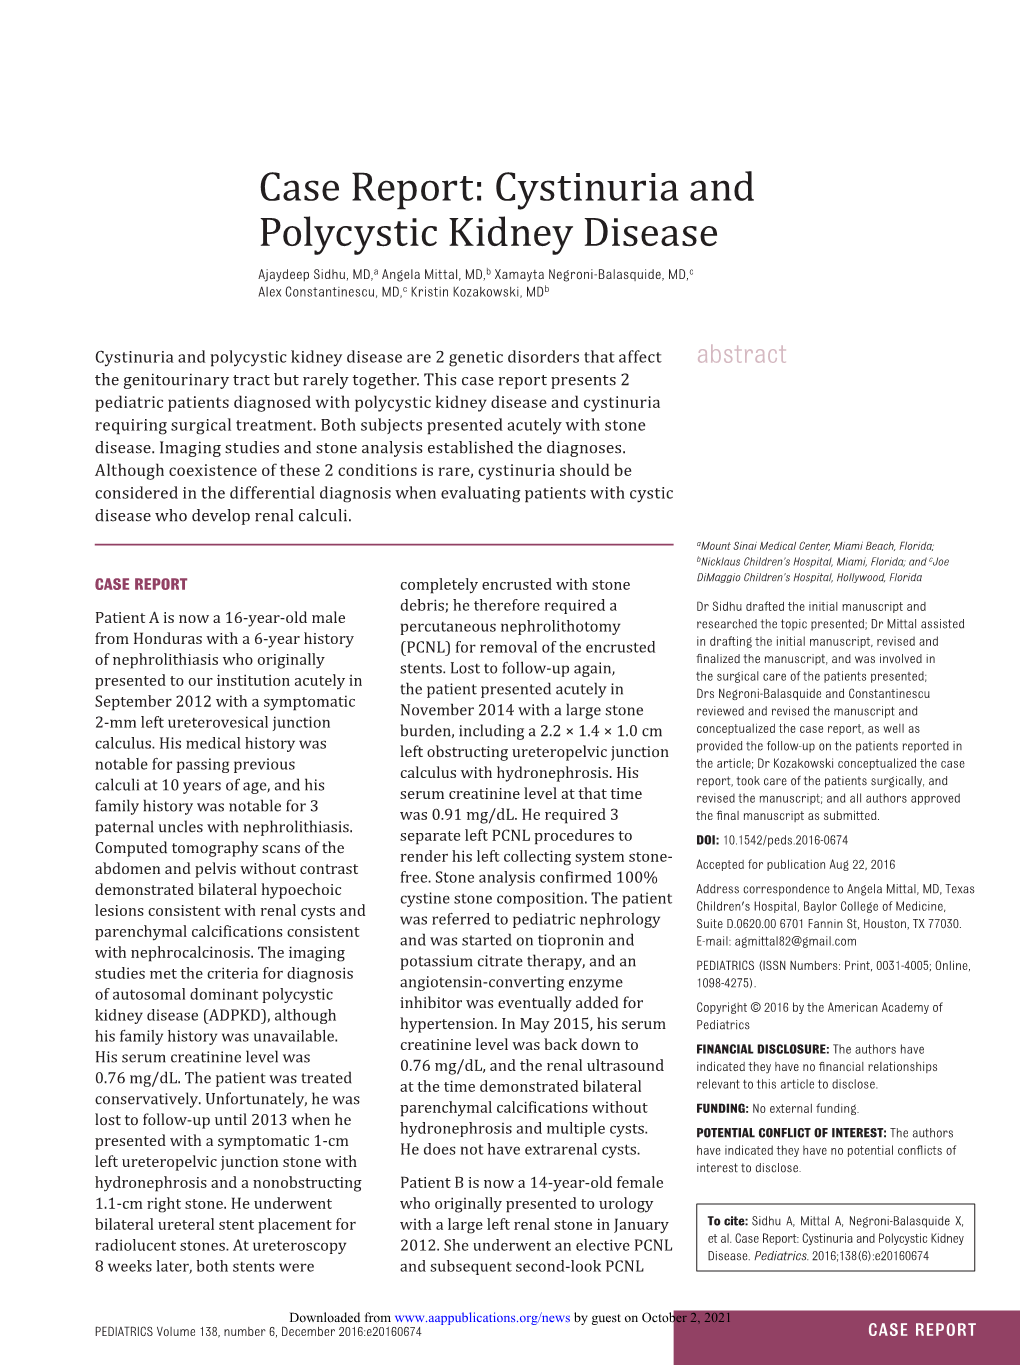 Case Report: Cystinuria and Polycystic Kidney Disease